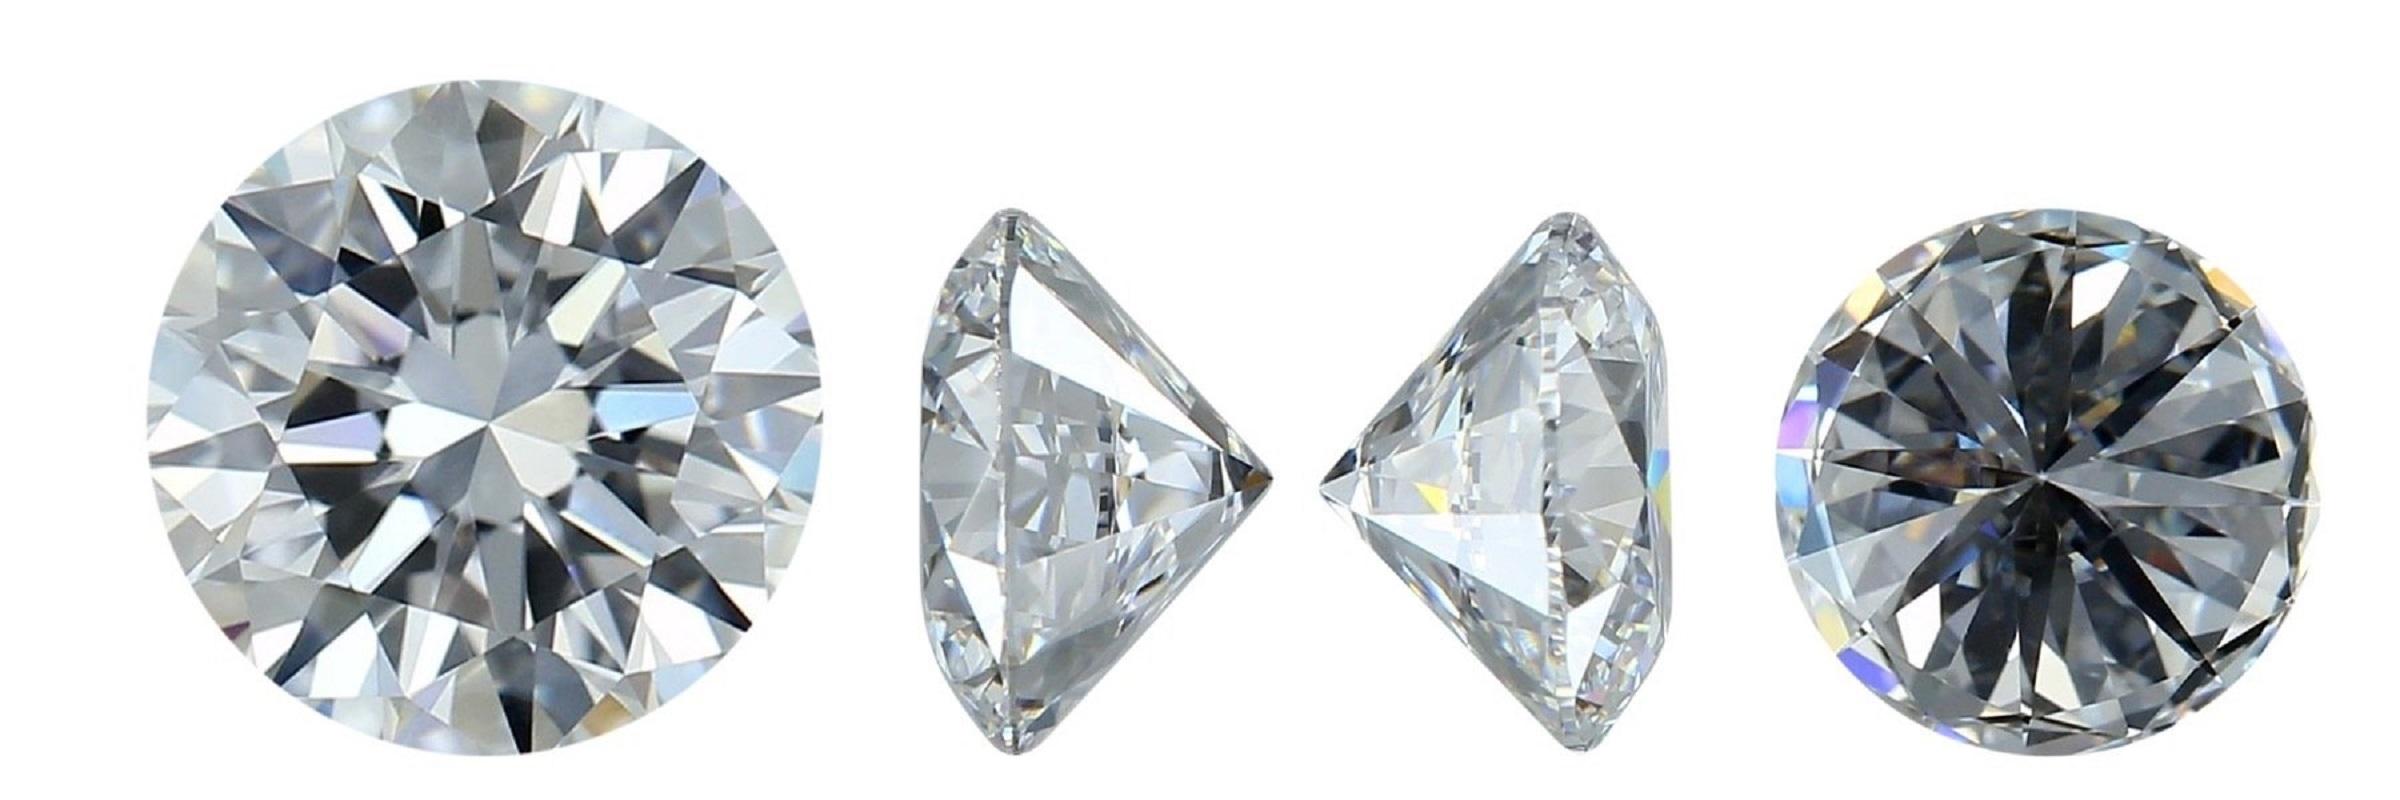 Natural round brilliant diamond in a 1.06 carat E VVS1 graded by GIA Laboratory with Excellent cut and Extremely shine. This diamond comes with a GIA Certificate and laser inscription number.

GIA 6445240560

Sku: DSPV-159972